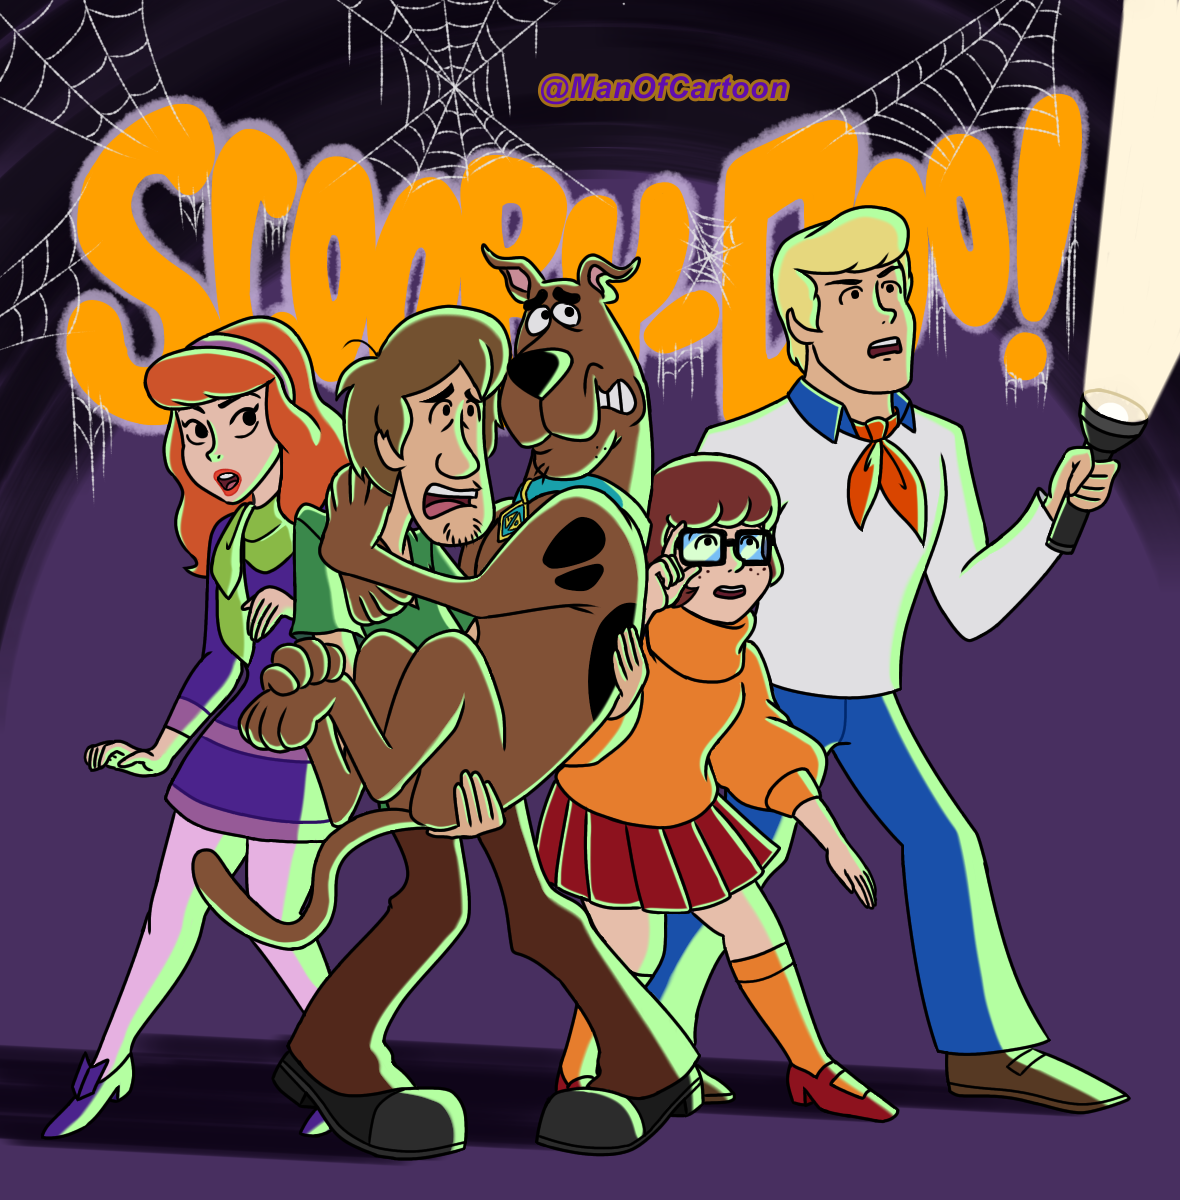 Scooby-Doo and Mystery Incorporated by ManOfCartoon on DeviantArt